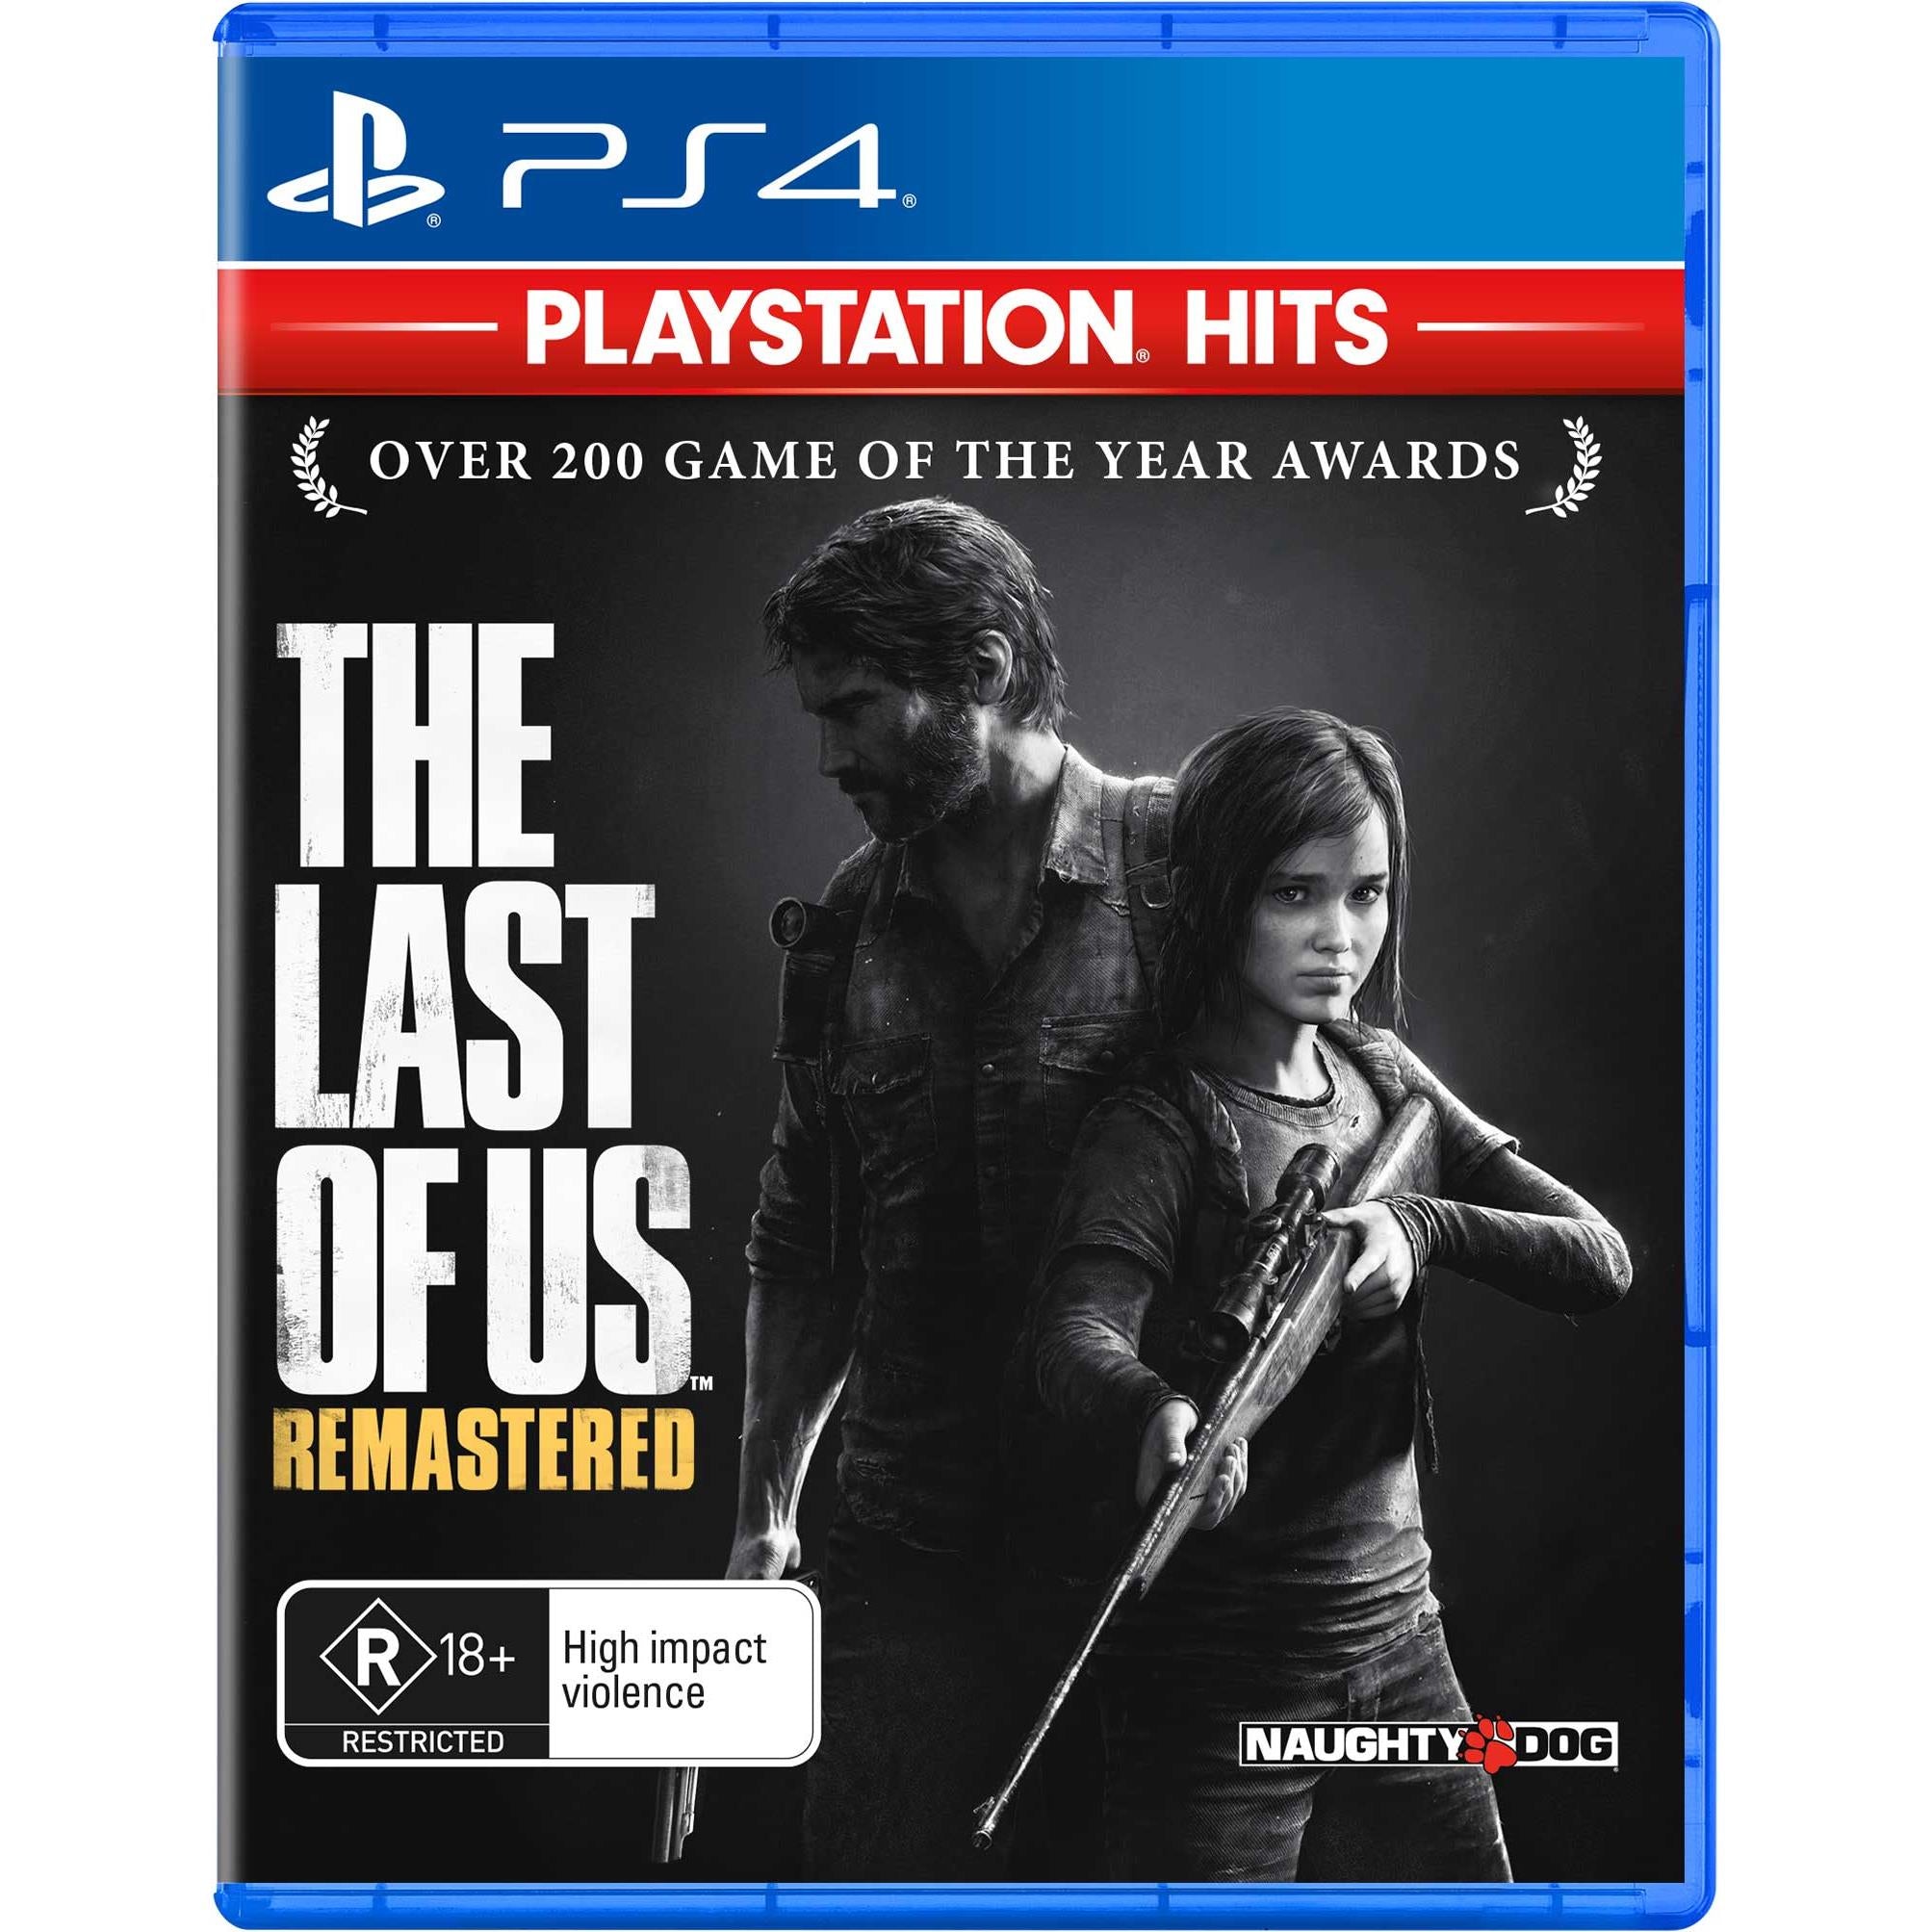 I wonder if there'll ever be a PS5 Upgrade for The Last Of Us Part